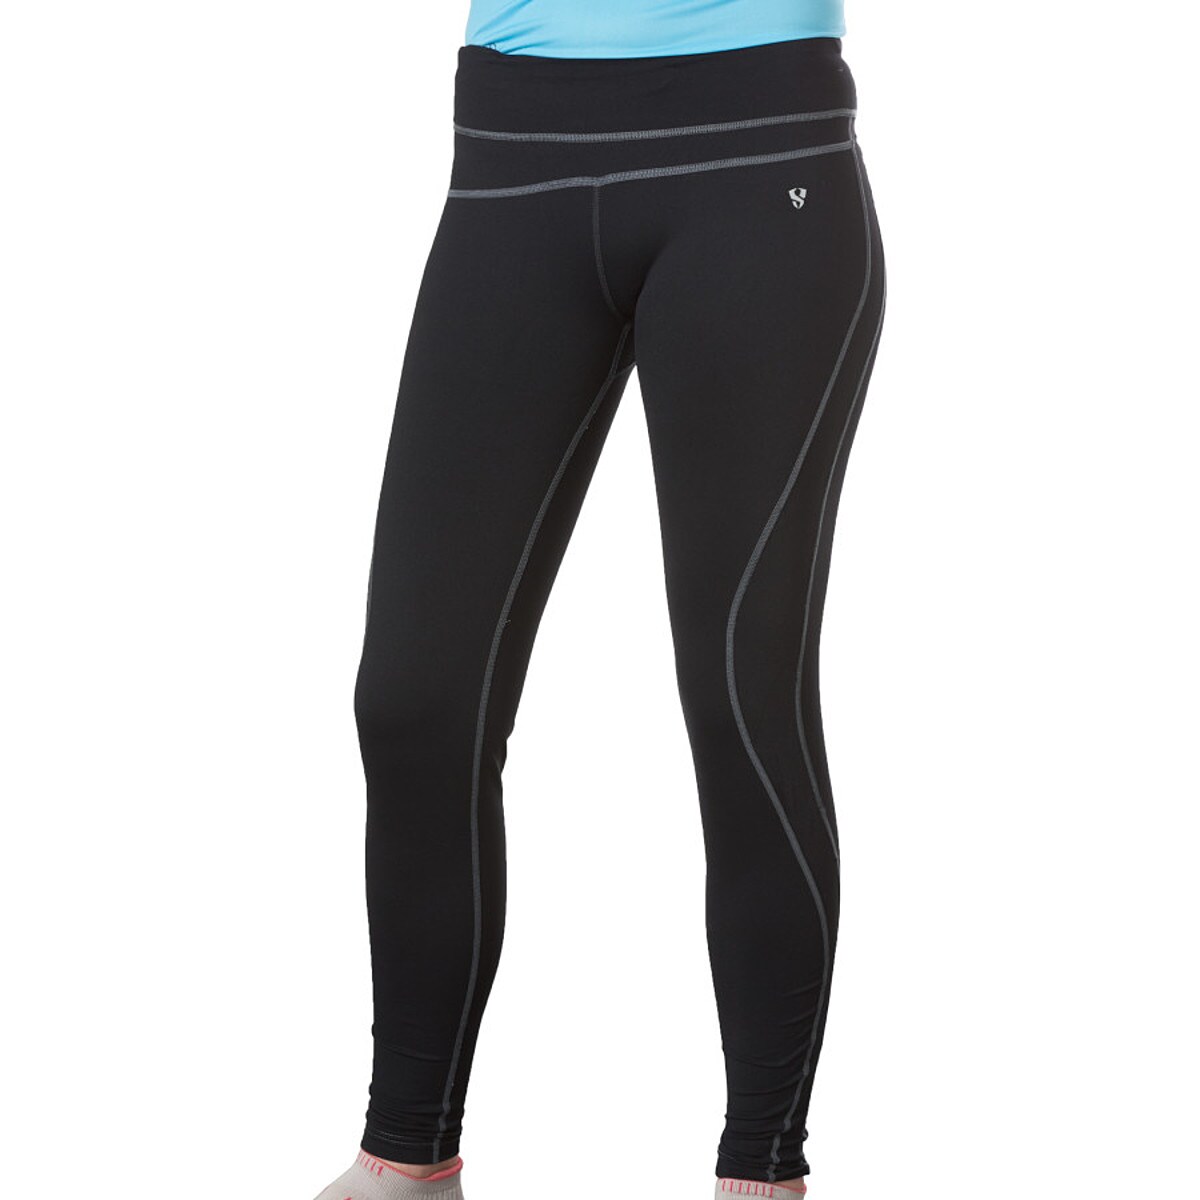 Stoic Thrive Spark Tight - Women's - Clothing